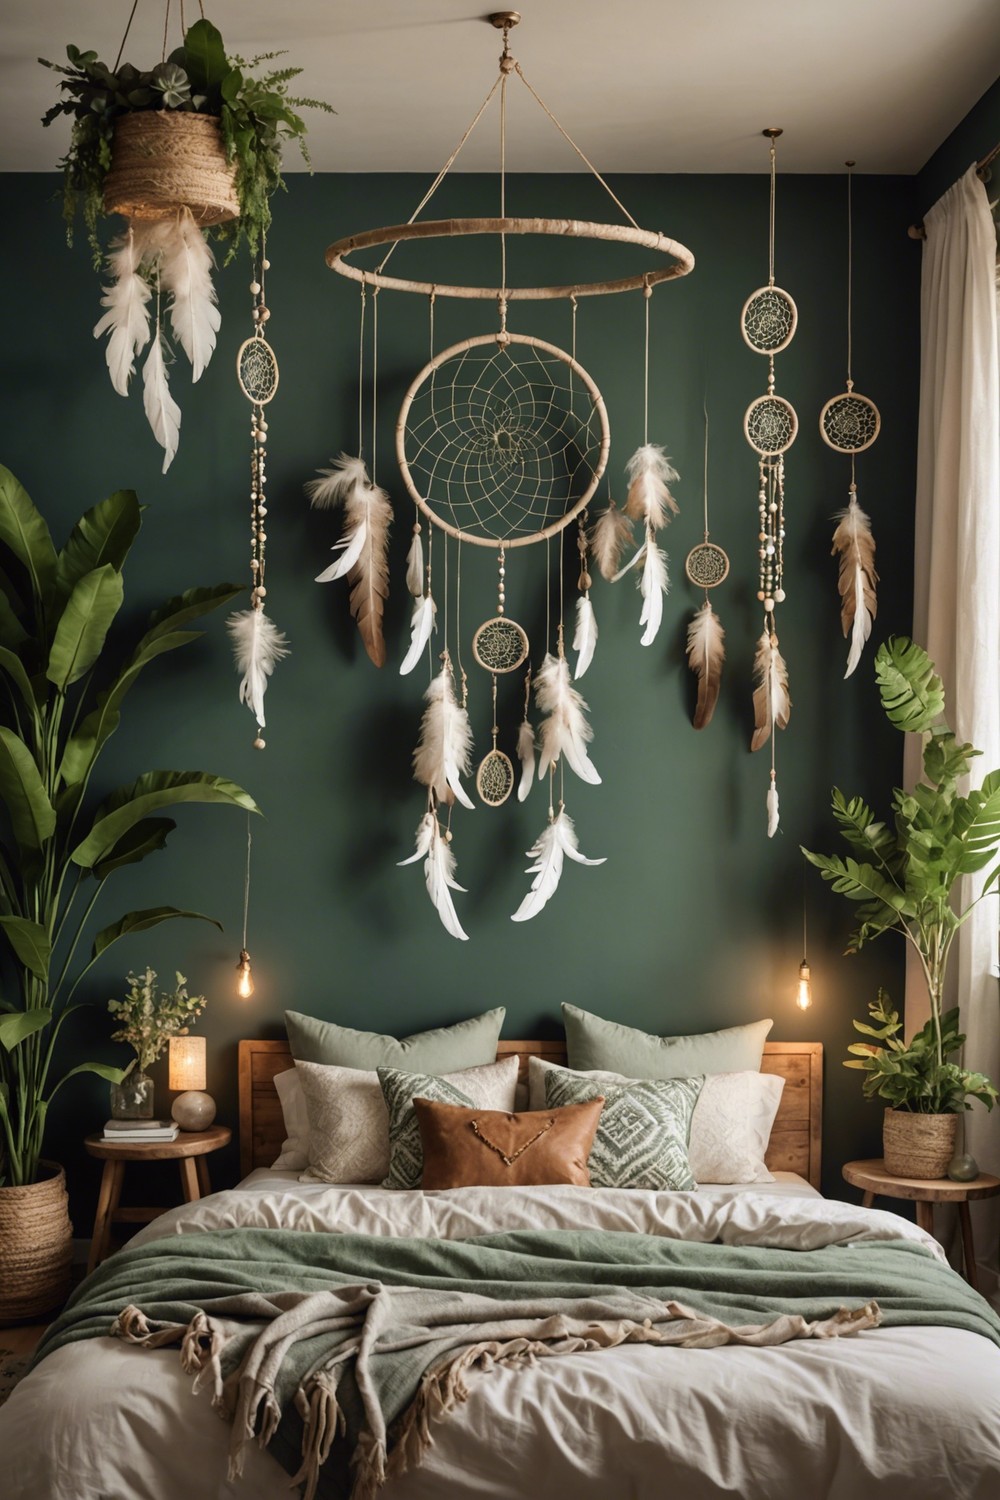 Dreamcatcher Inspiration: Hanging Feathers and Beads in Earthy Tones